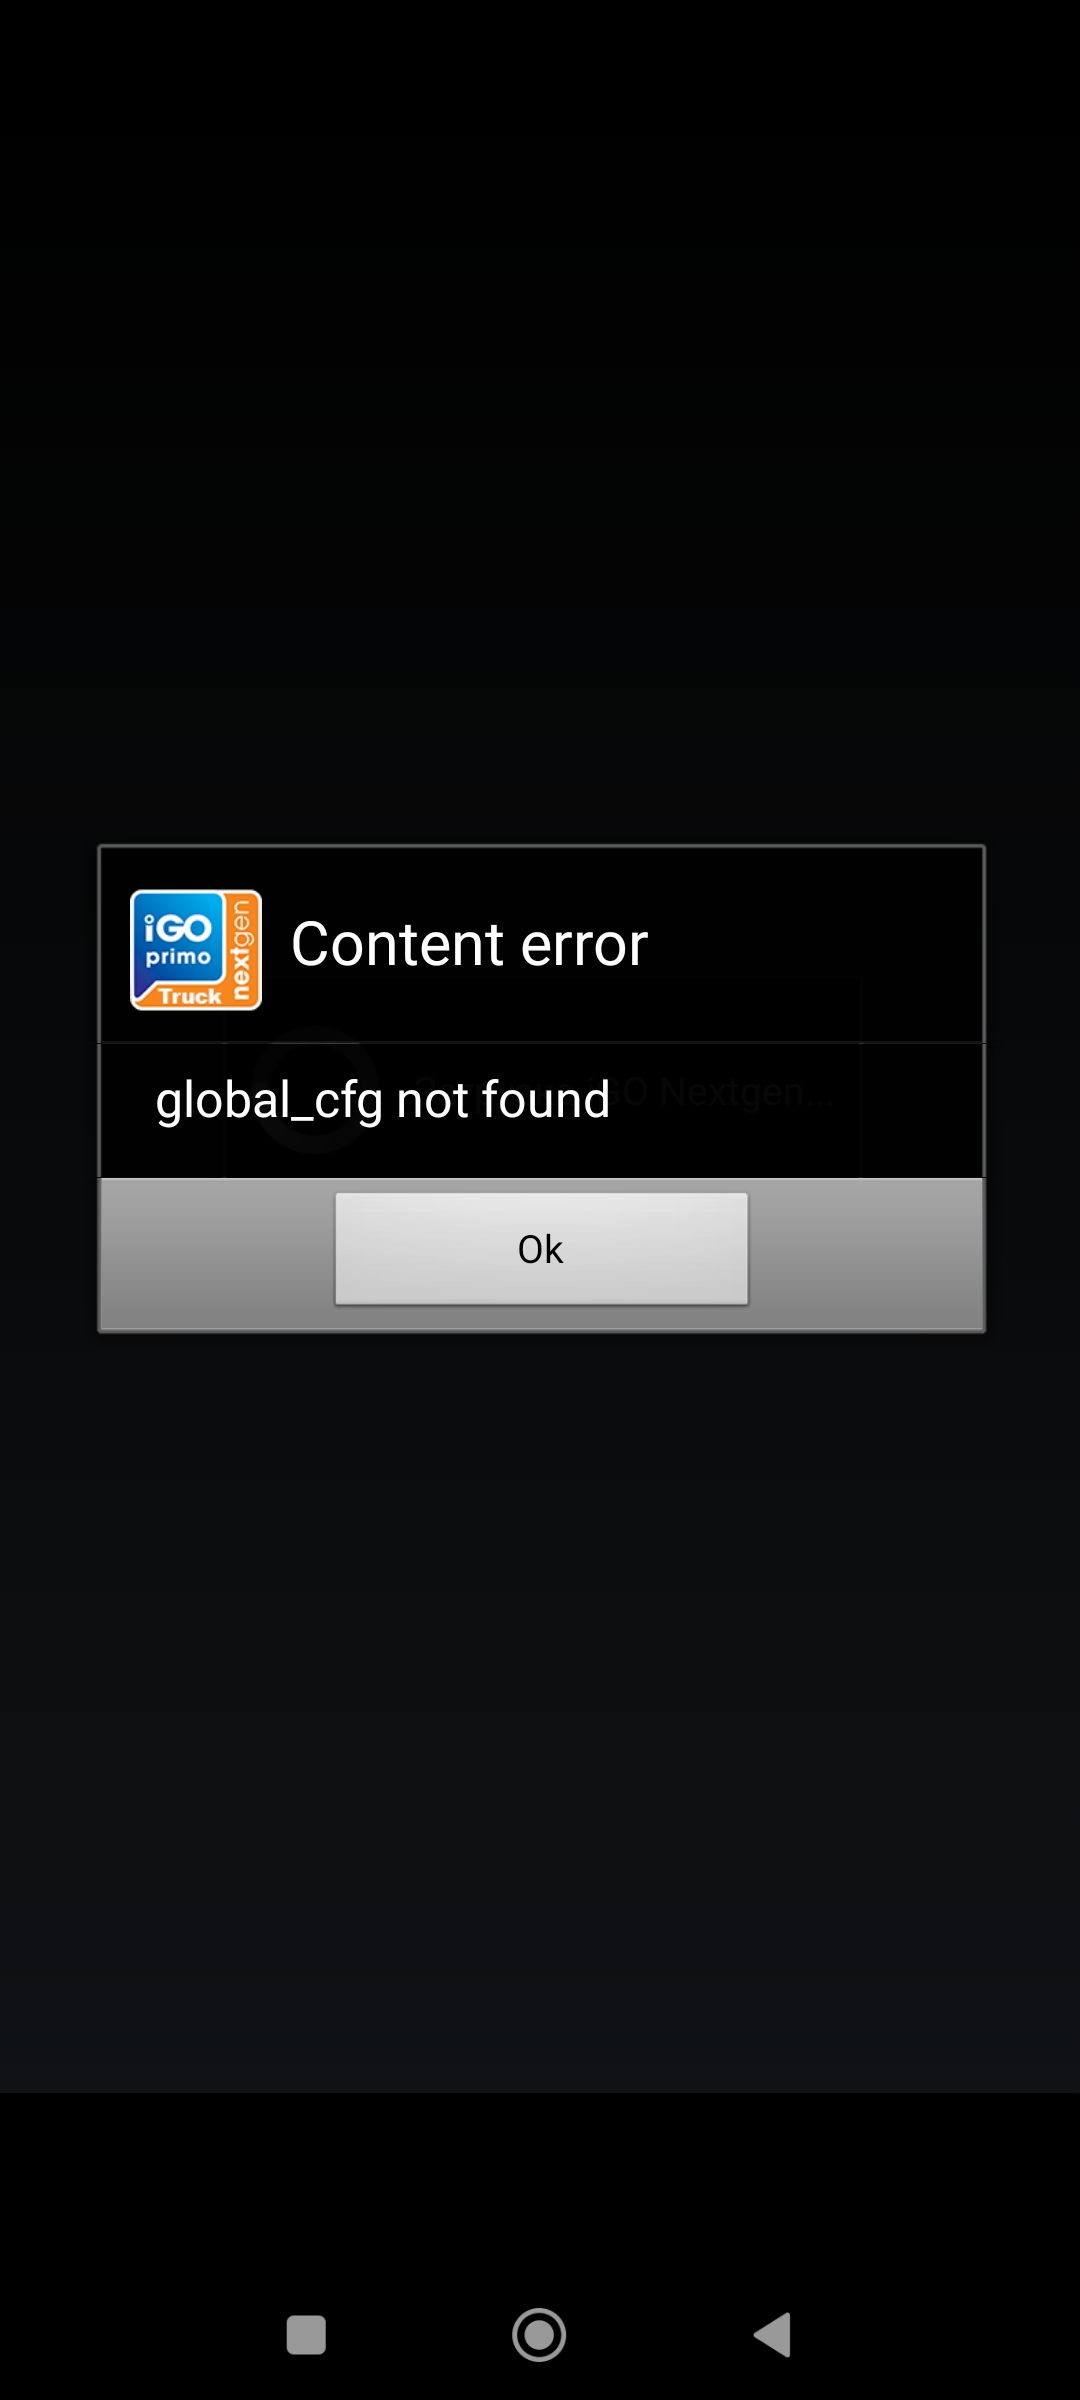 global_cfg not found